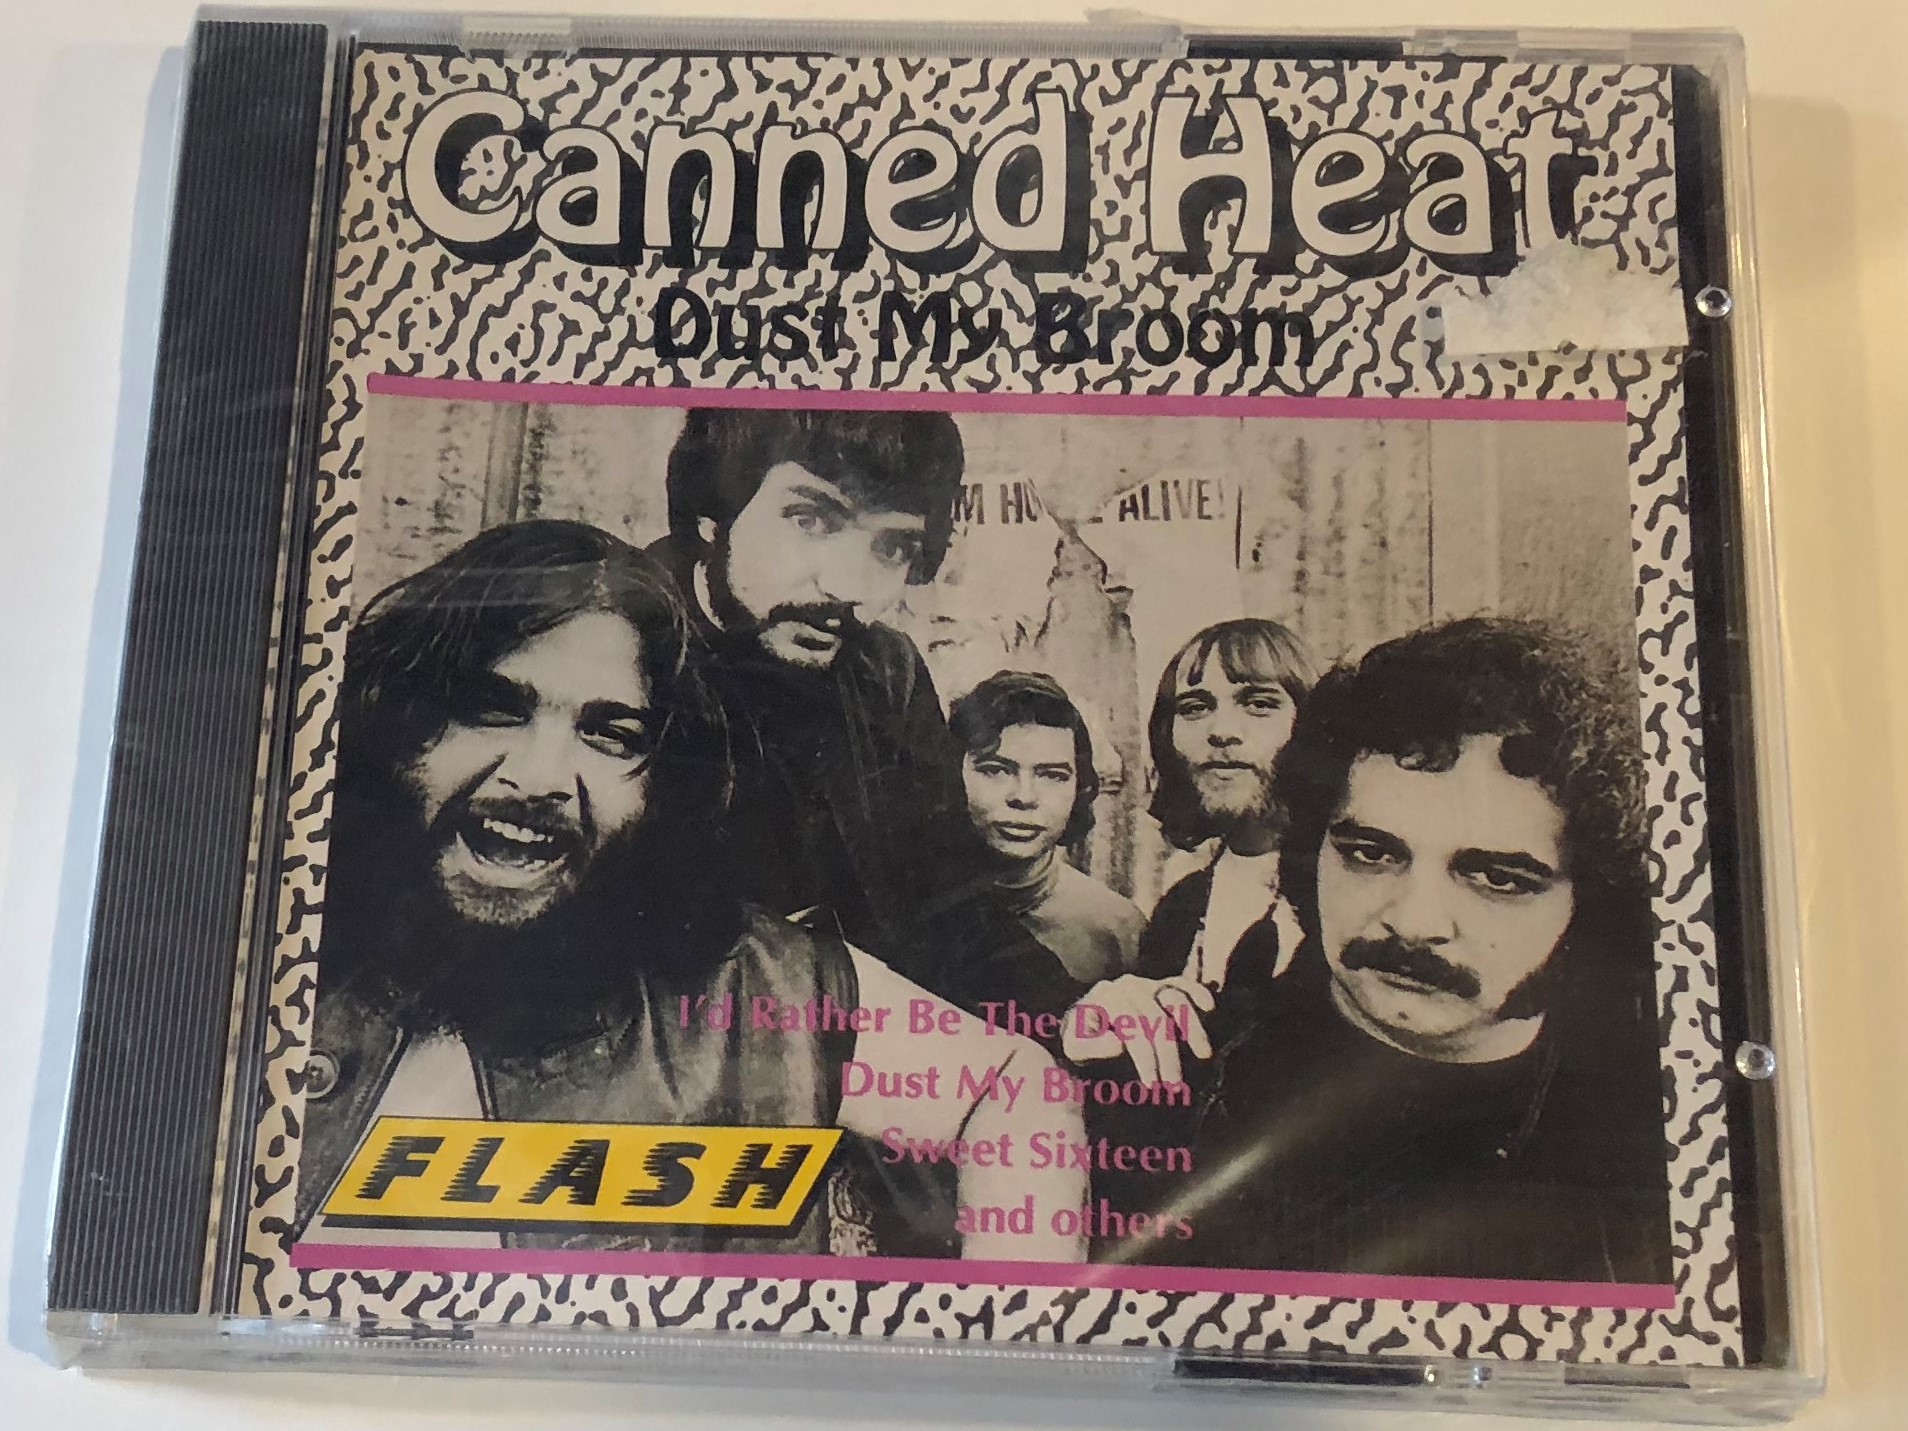 canned-heat-dust-my-broom-i-d-rather-be-the-devil-dust-my-broom-sweet-sixteen-and-others-flash-audio-cd-stereo-8350-2-1-.jpg